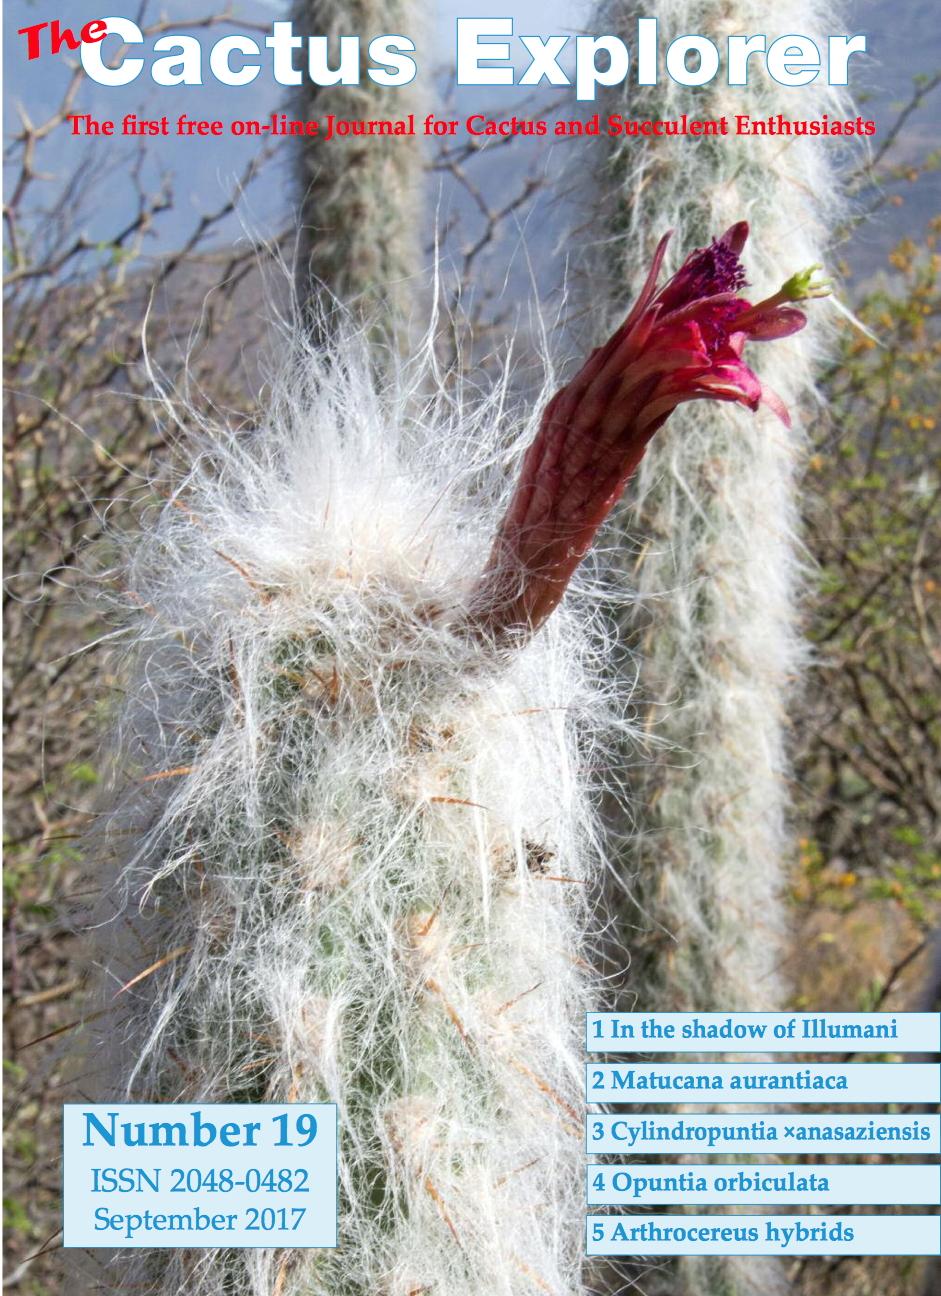 CENTRAL OKLAHOMA CACTUS AND SUCCULENT SOCIETY Here is another issue of The Cactus Explorer, a great online free journal.